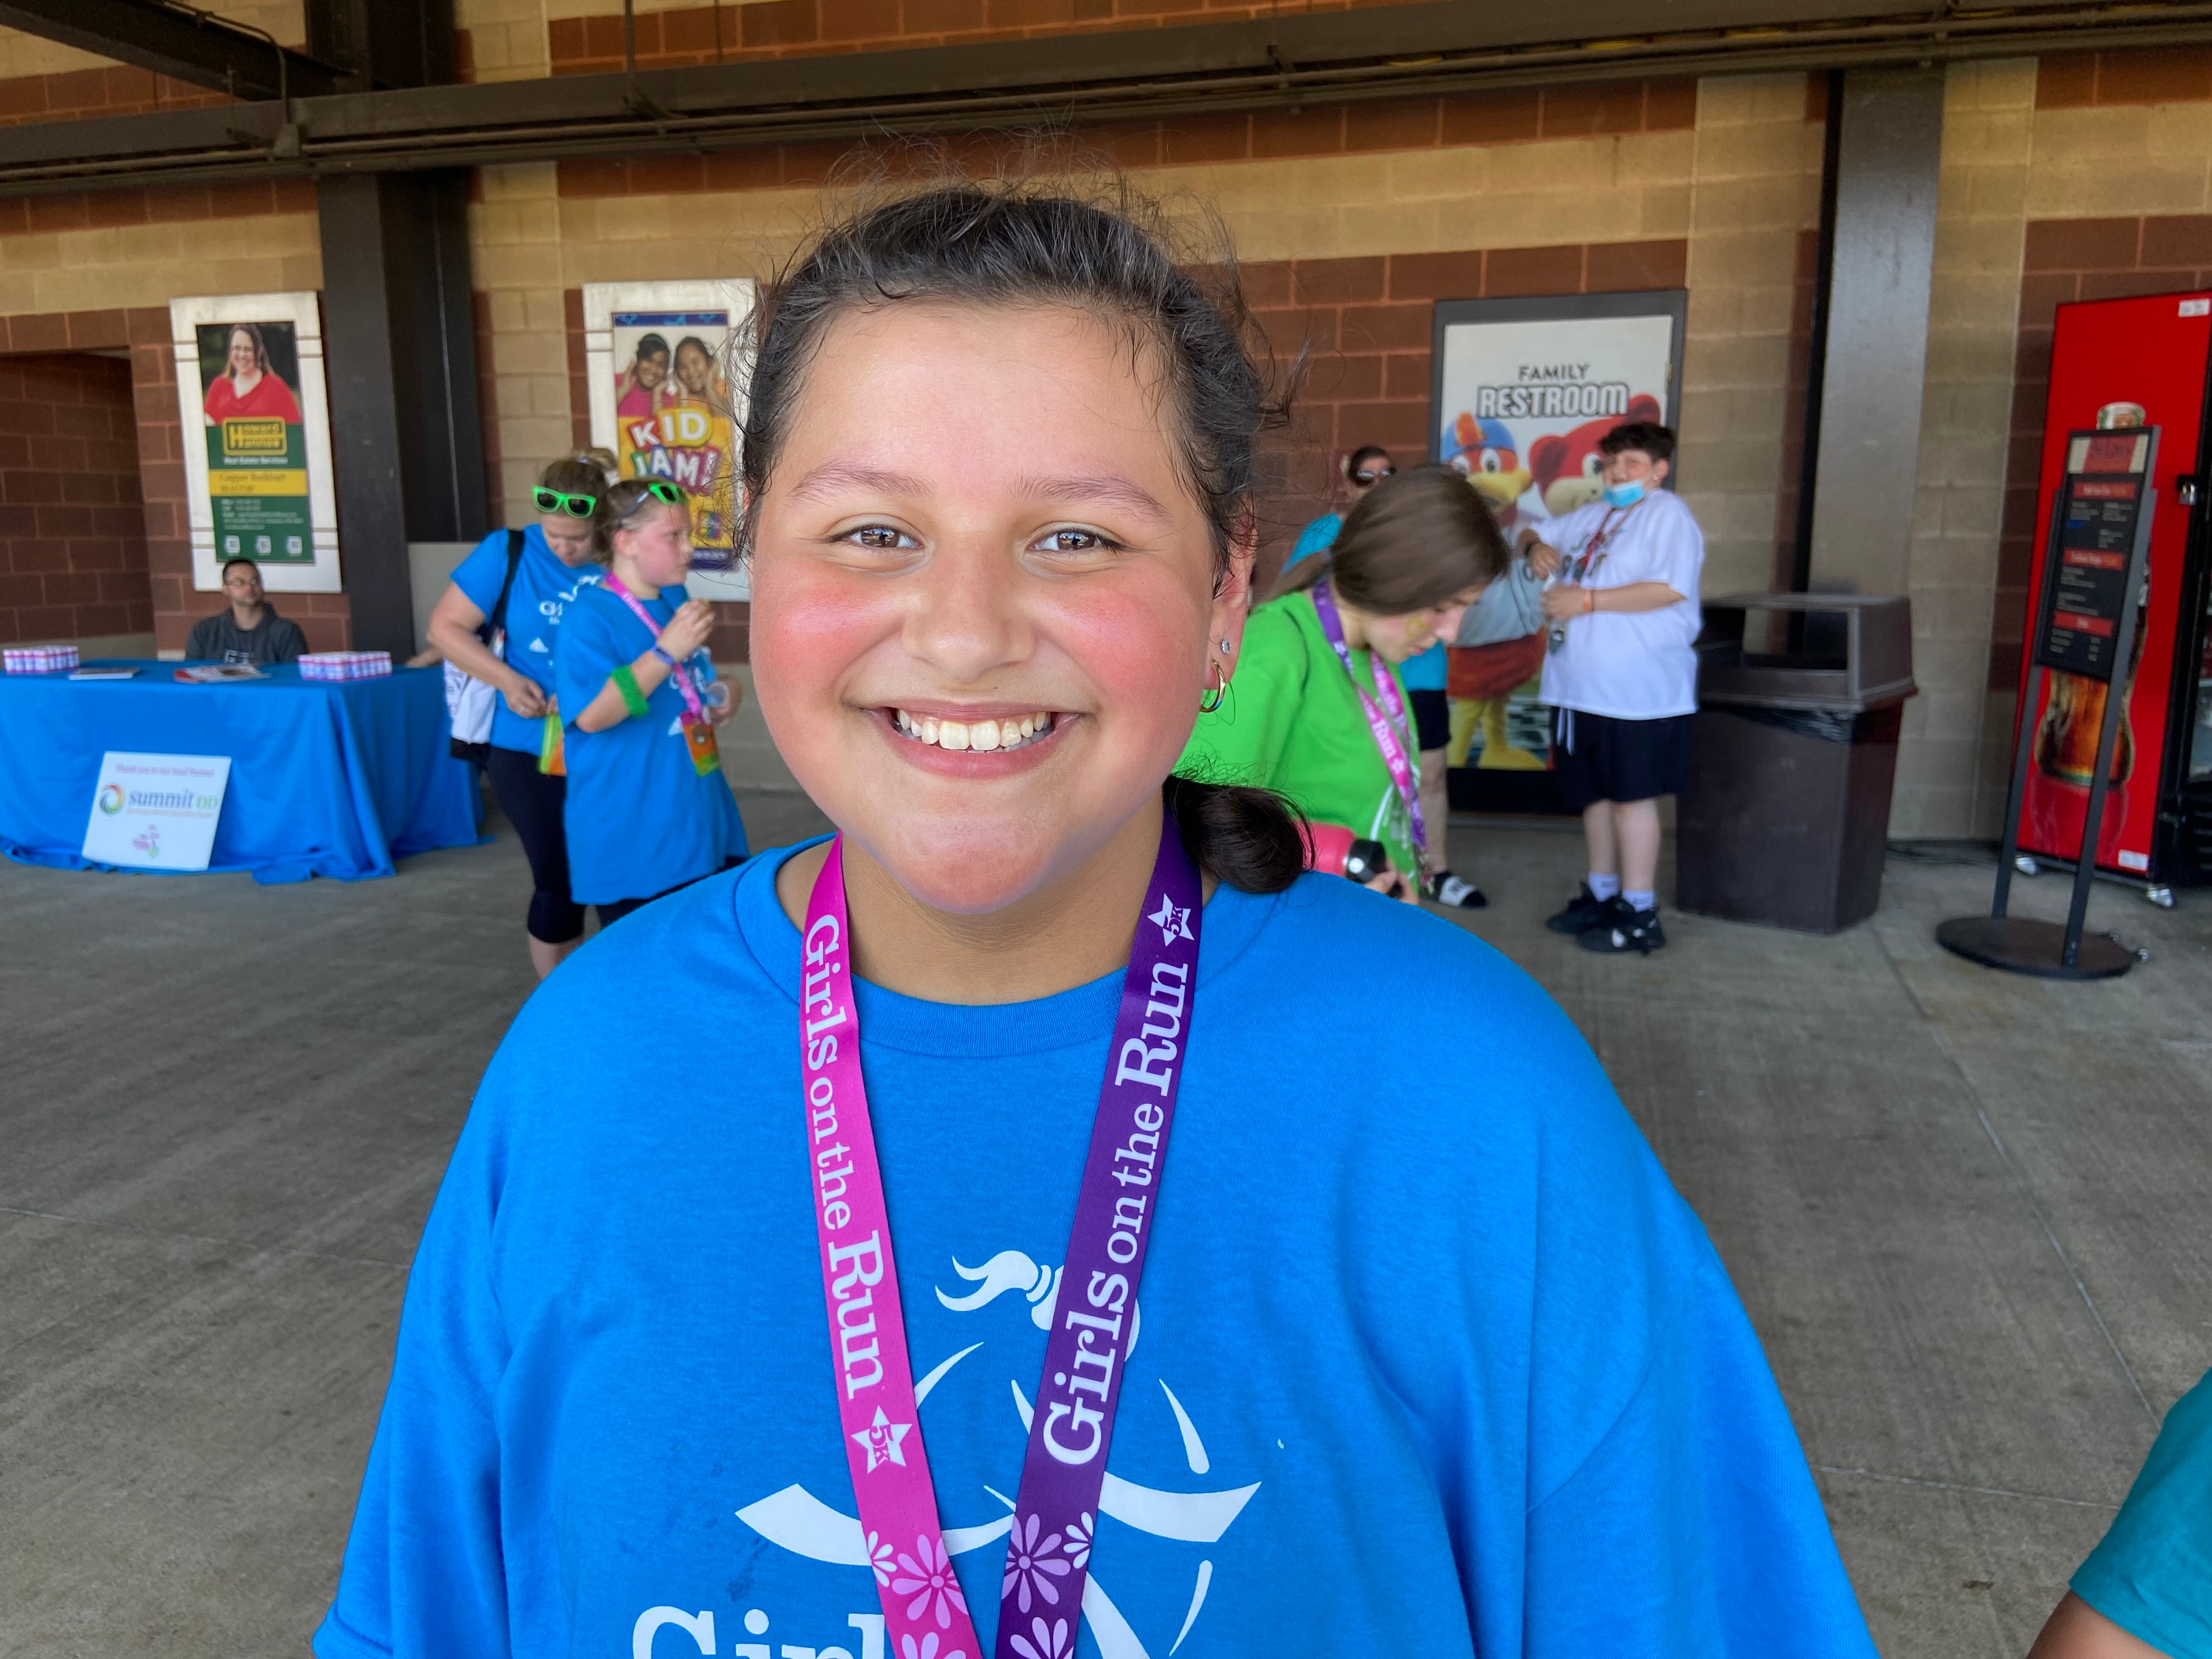 A Girls on the Run participant smiles wearing a blue shirt and her 5K medal